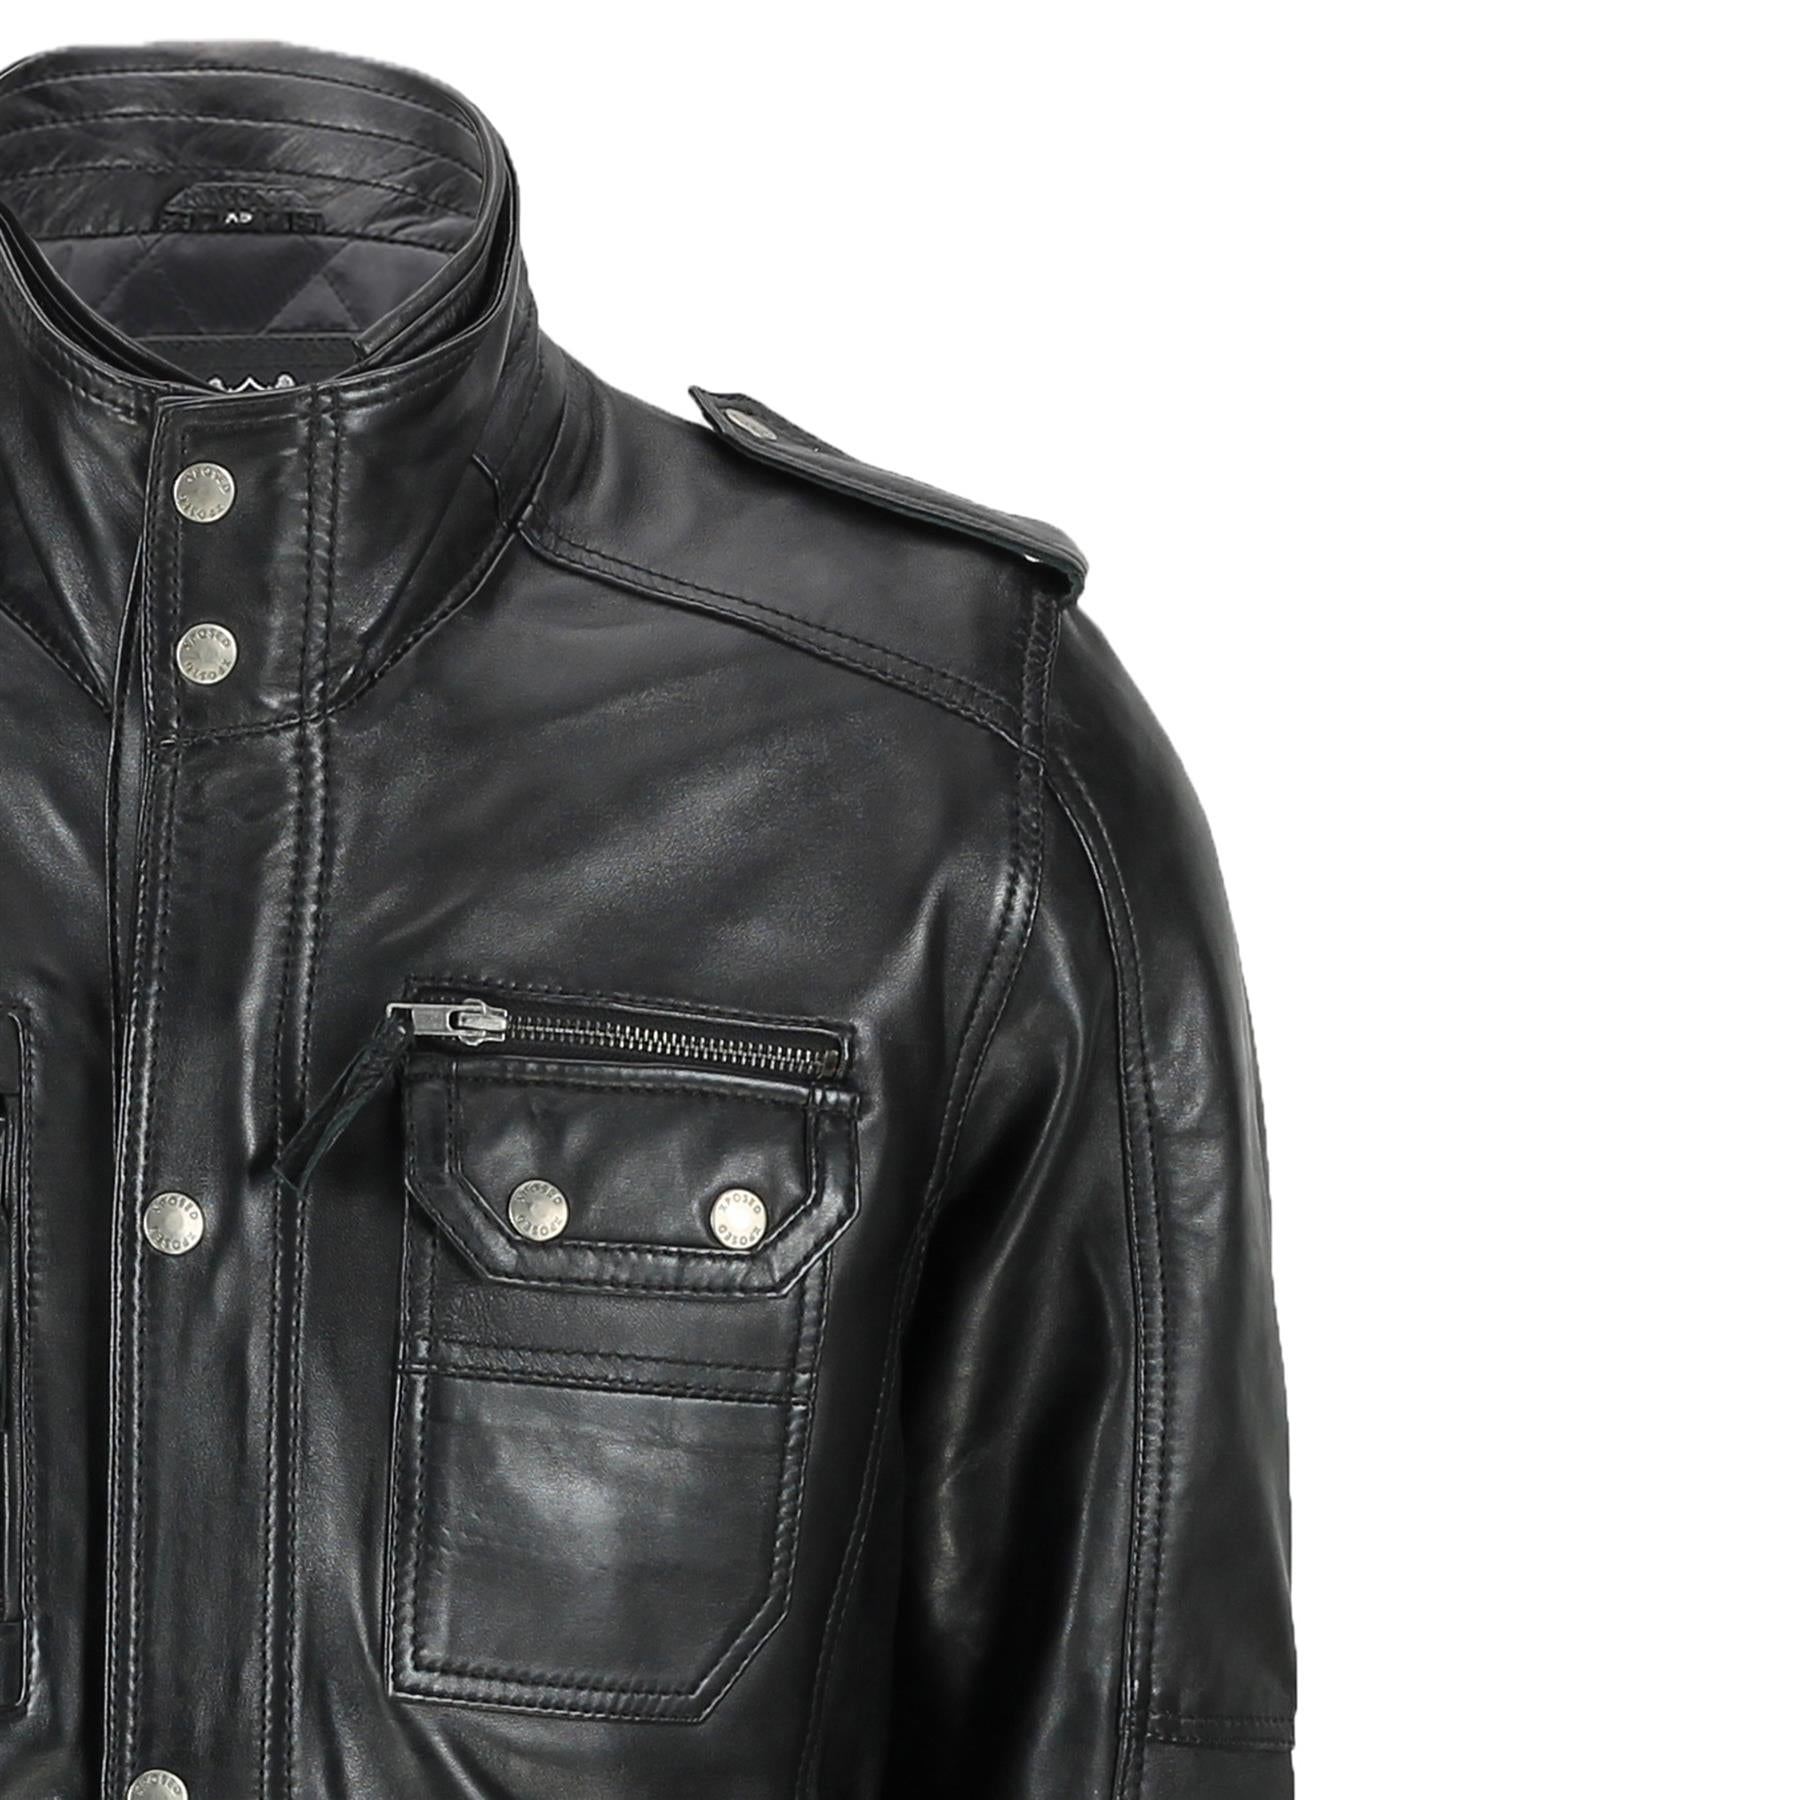 Mens Classic Black Soft Wax Real Leather Smart Vintage Jacket Military Coat